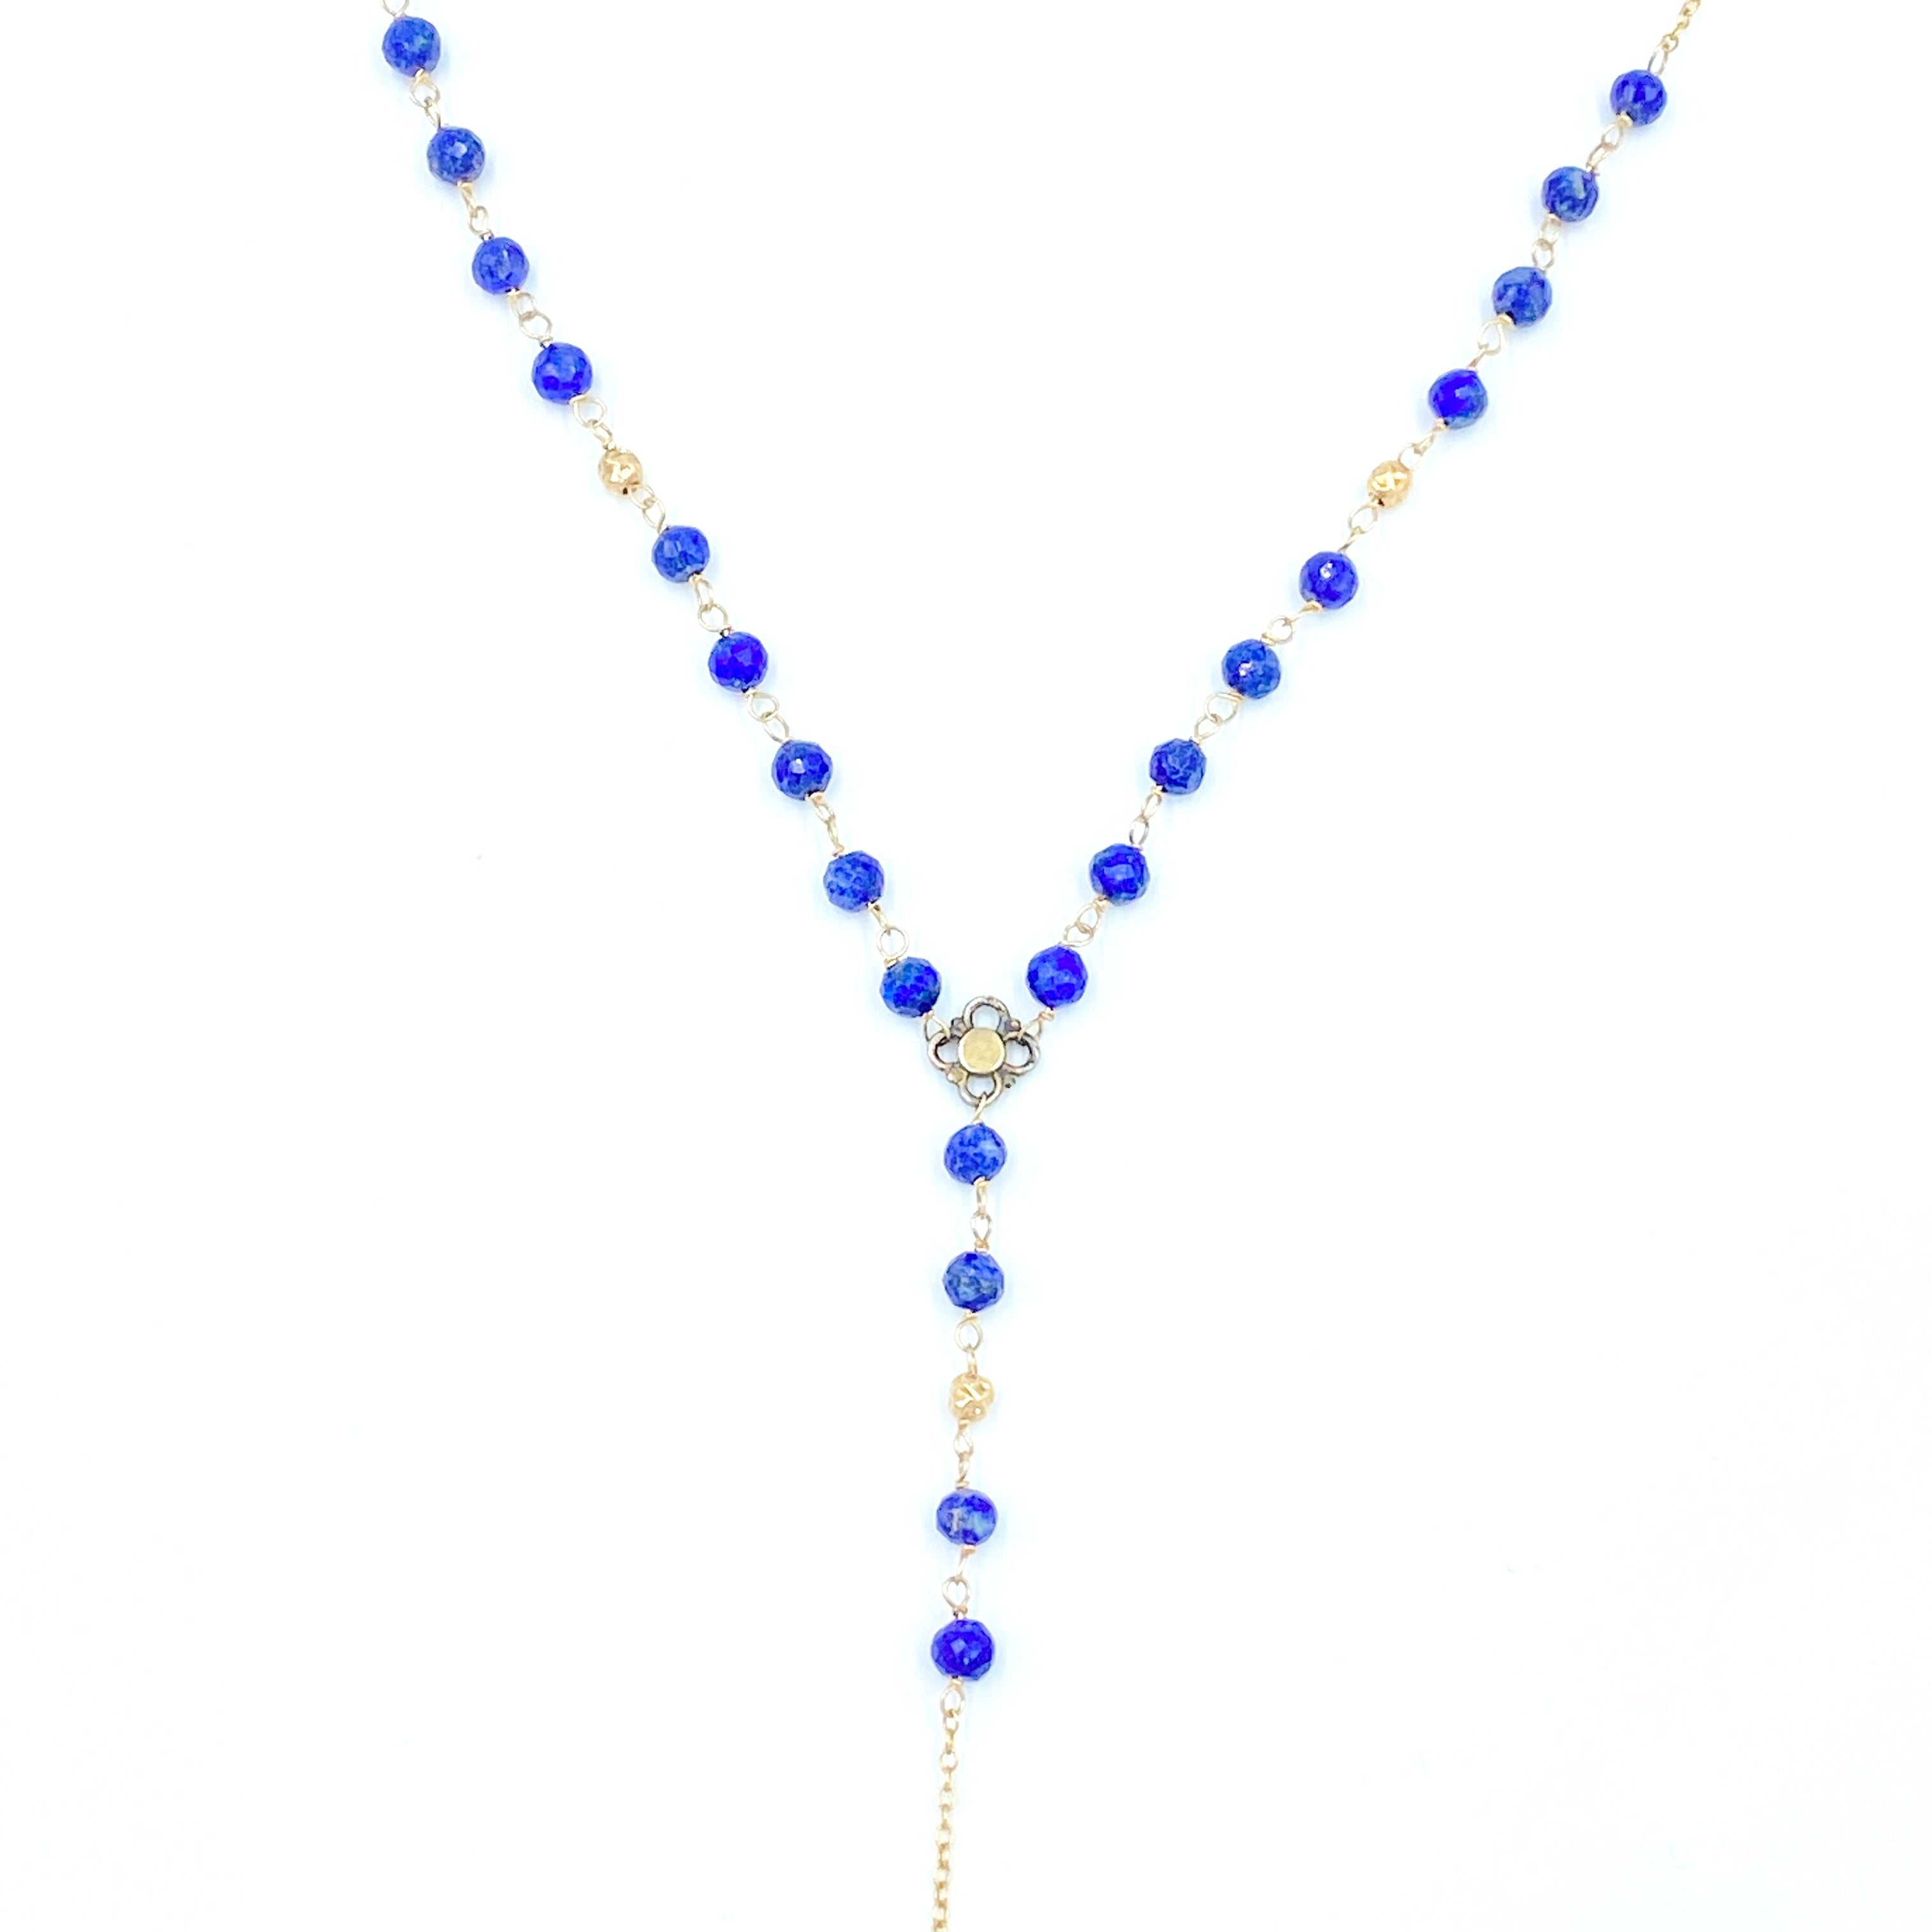 Joanna Bisley 14kt Goldfill and Lapis Necklace - 0